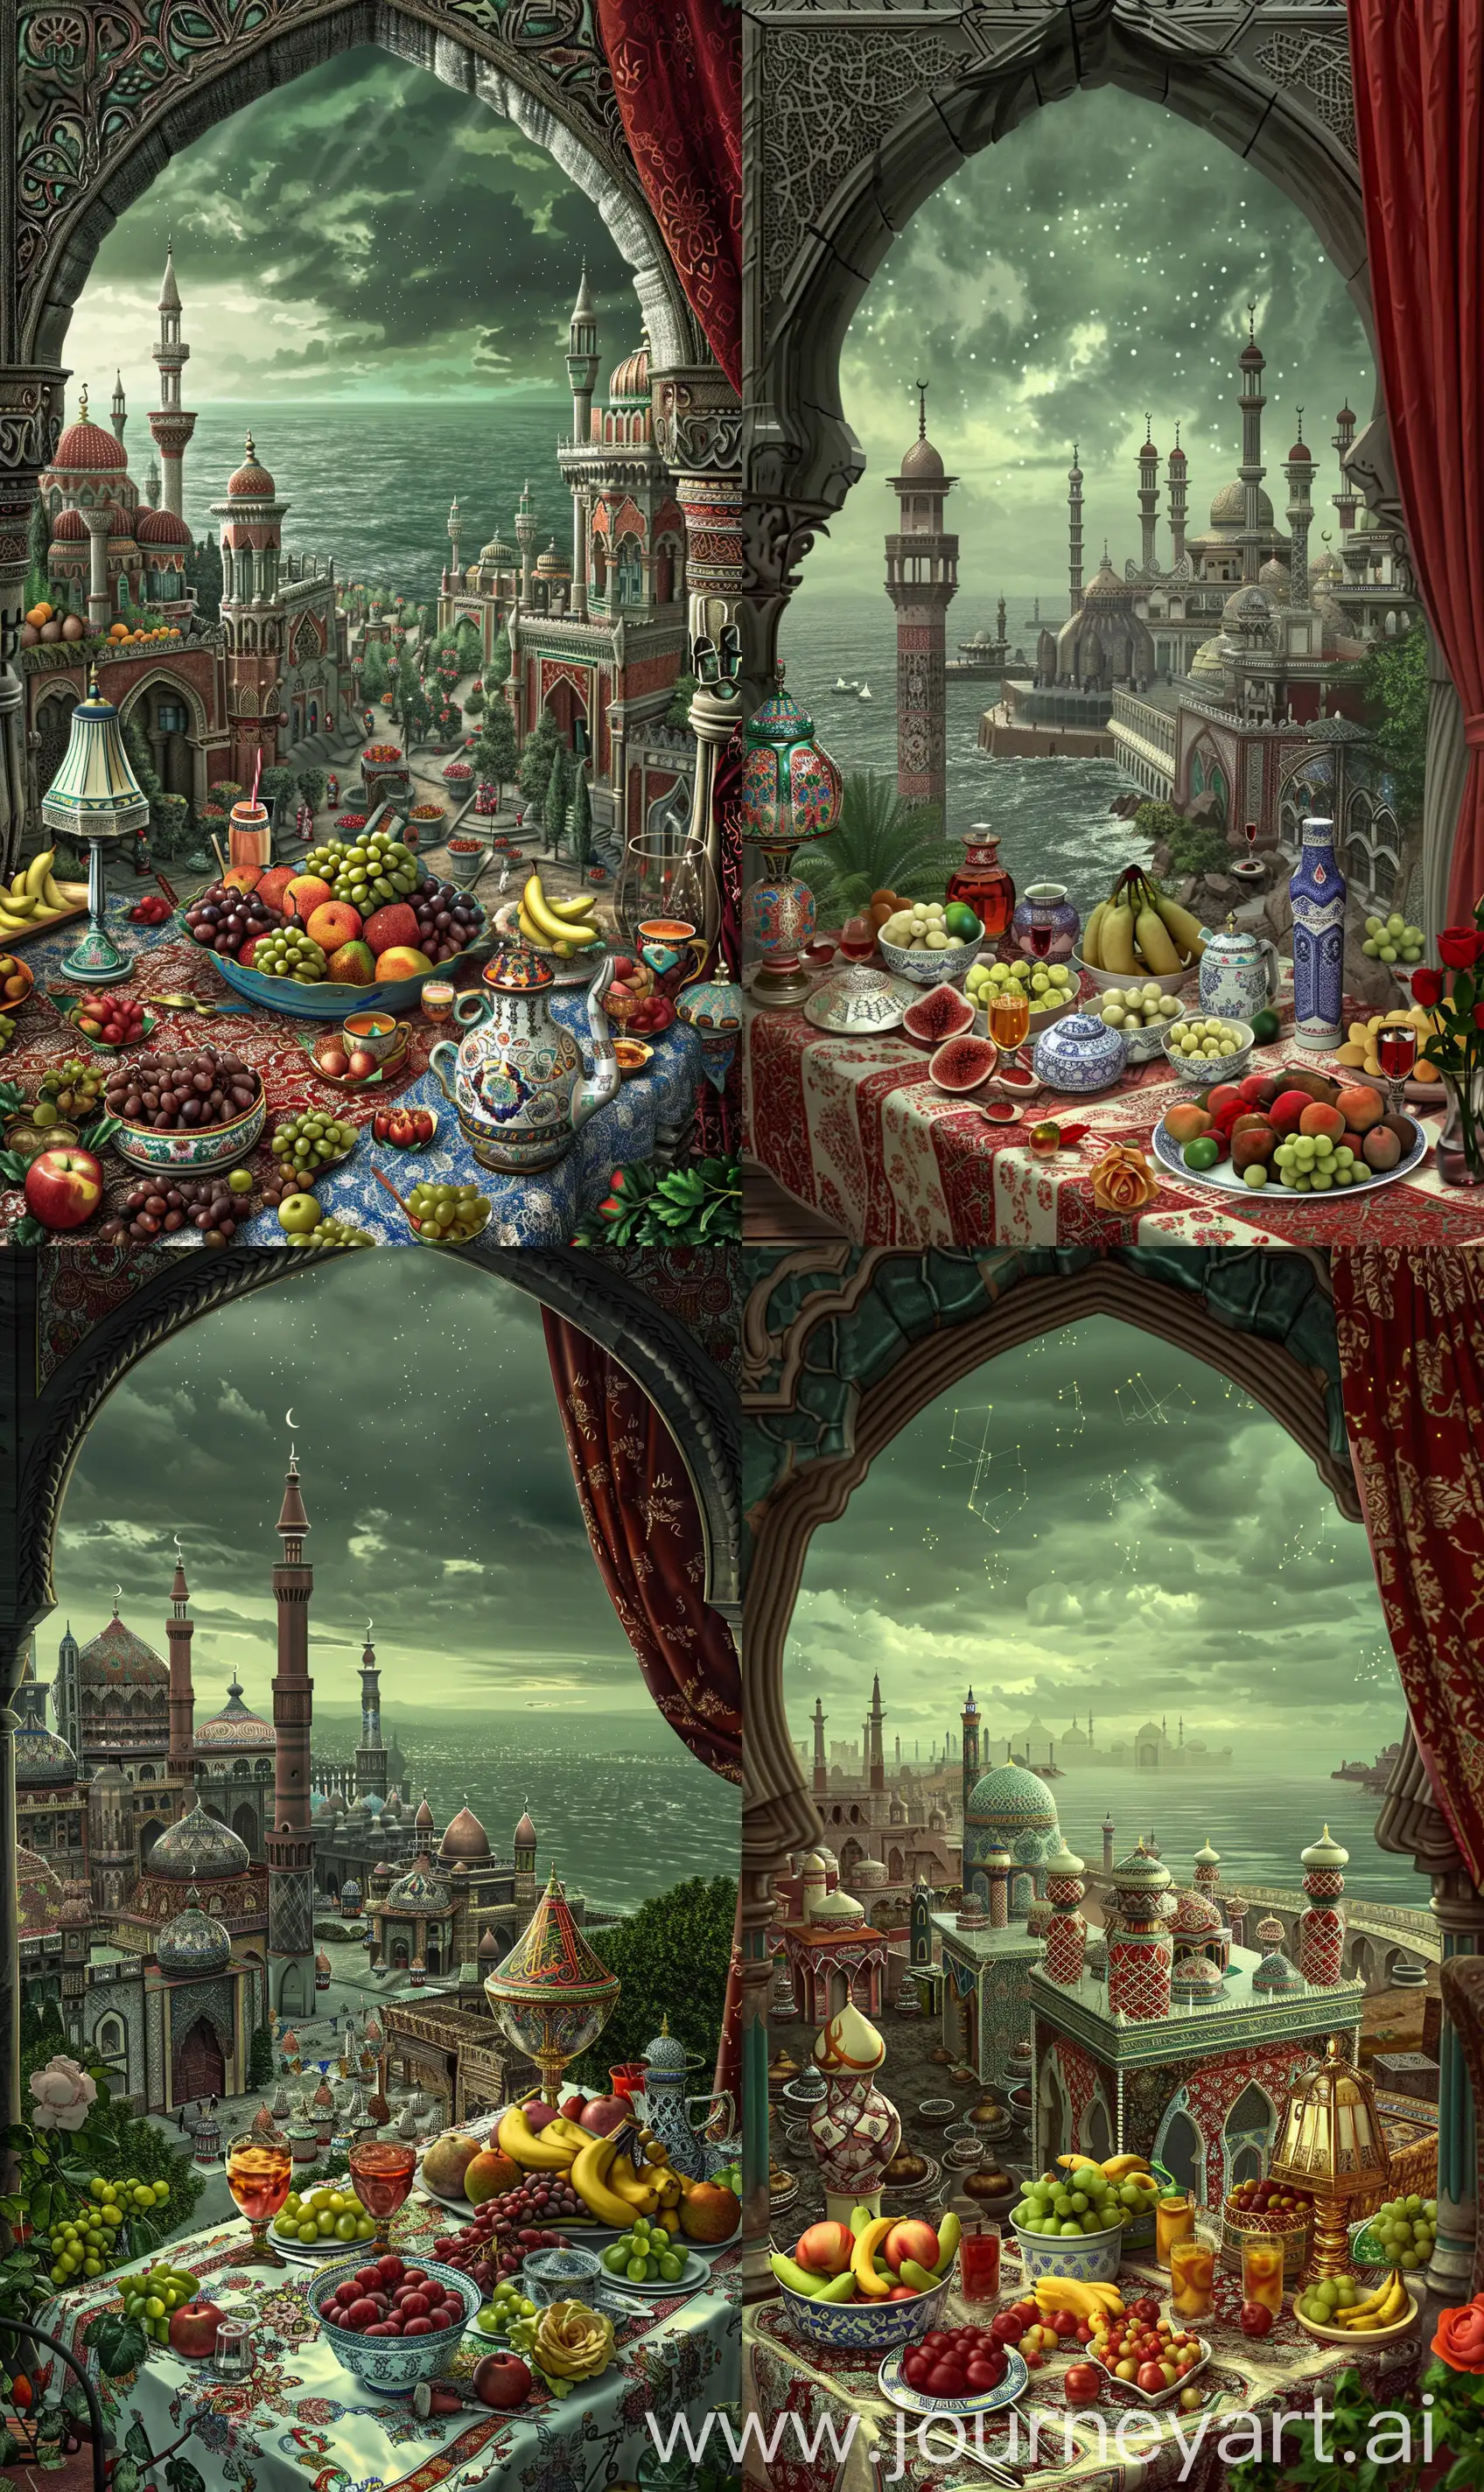 Fantasy art in style of artstation, view from a Timurid arch, view of islamic buildings and mosques having red white blue persian design tiled exterior, beyond a vast grey sea, a table cloth full of islamic ornamented porcelain with many fruits grapes bananas apples, rose tulip flowers and drinks, islamic ornamented lamp on table, arabian curtain on side, dark greenish grey cloudy sky with stars --ar 3:5